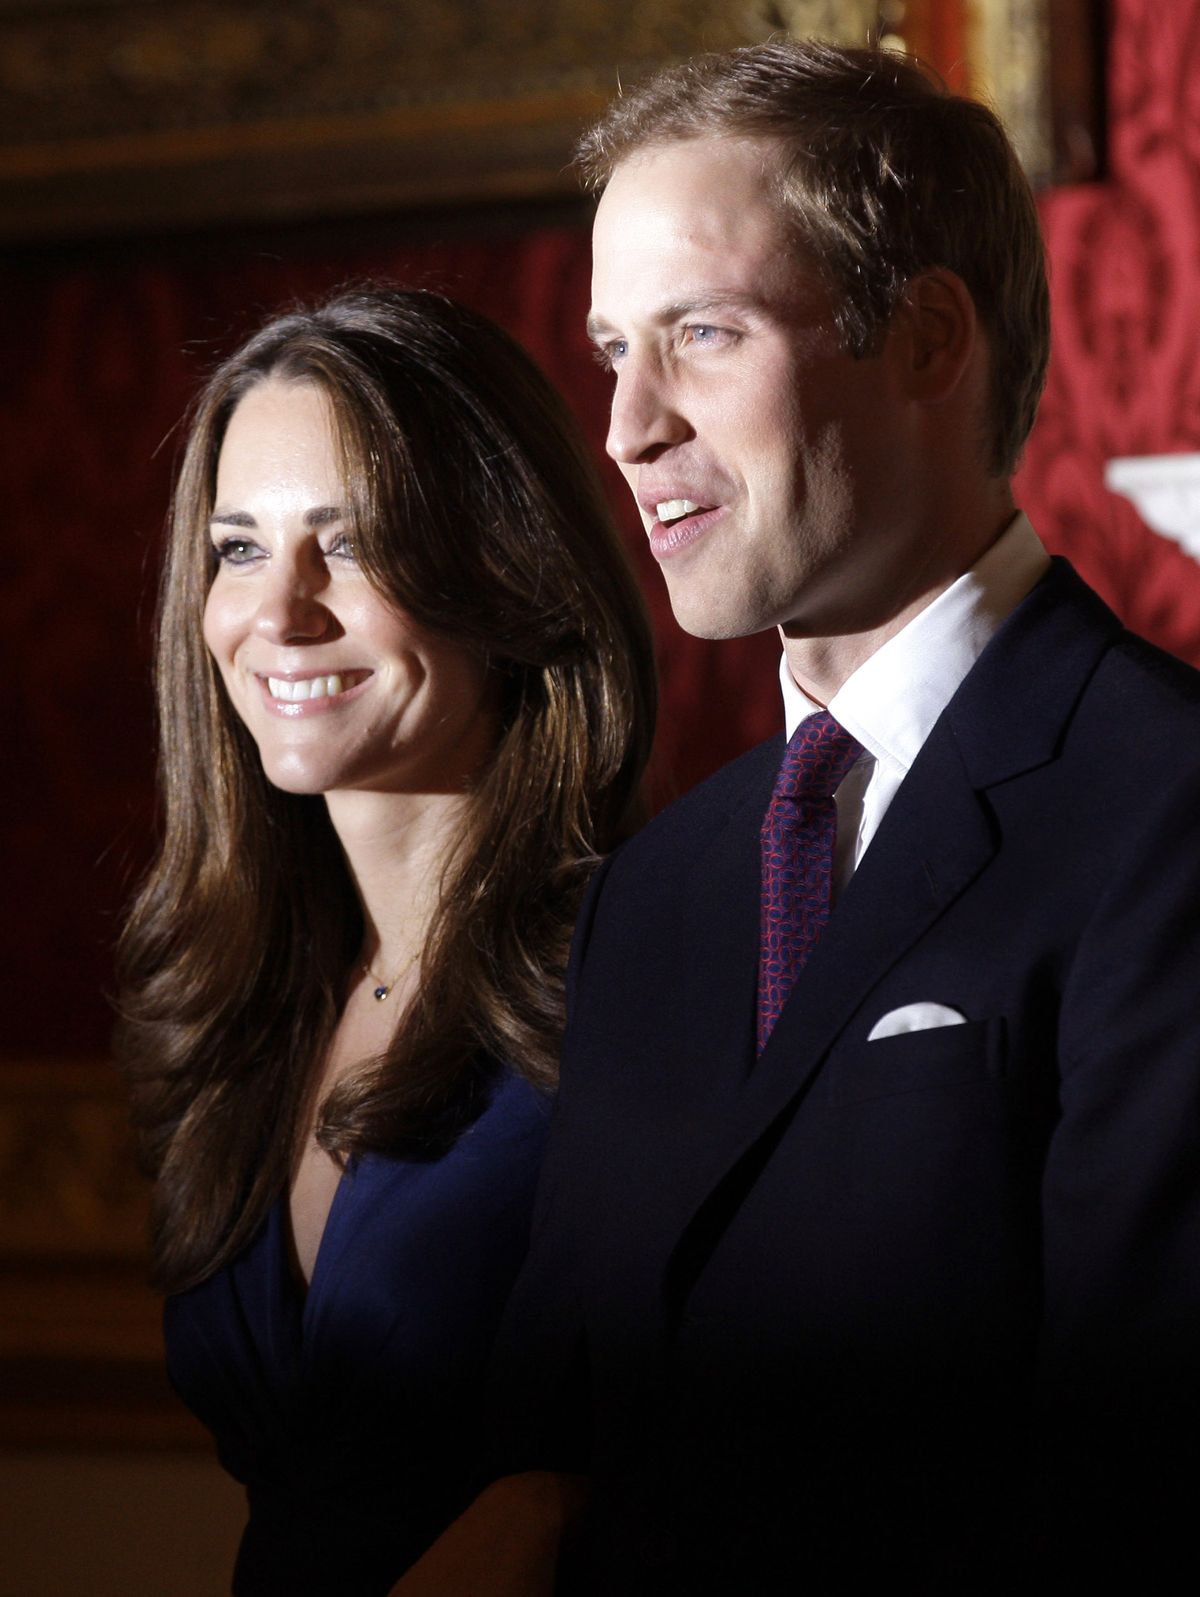 Britain’s Prince William and his fiancée Kate Middleton pose for the media at St. James’s Palace in London after announcing their engagement last November.